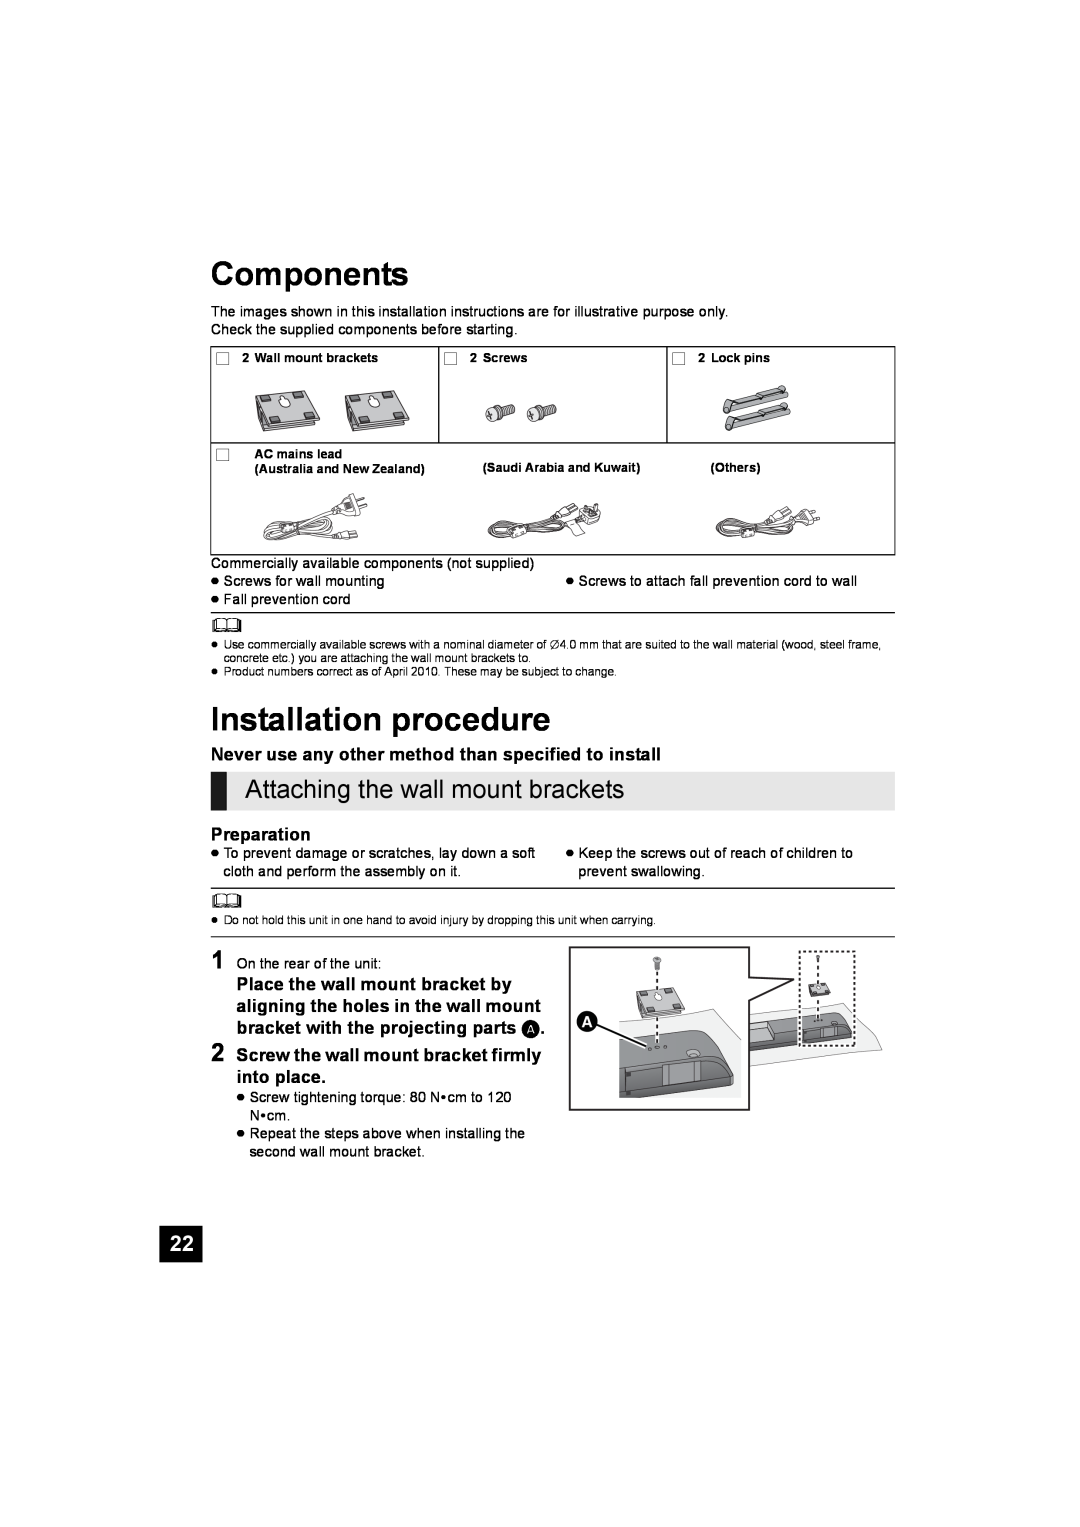 Panasonic SC-HTB10 operating instructions Components, Installation procedure, Attaching the wall mount brackets 